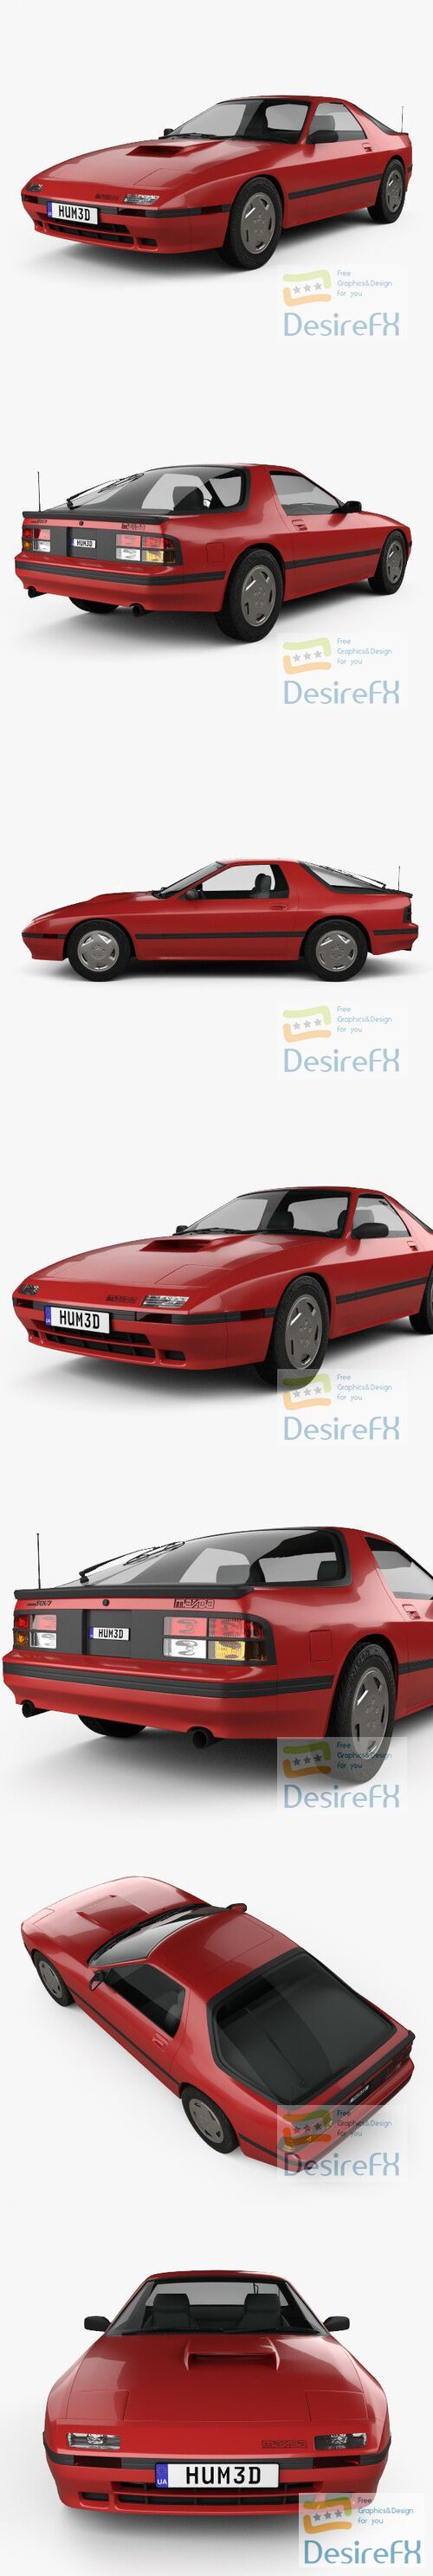 Mazda RX-7 coupe 1985 3D Model